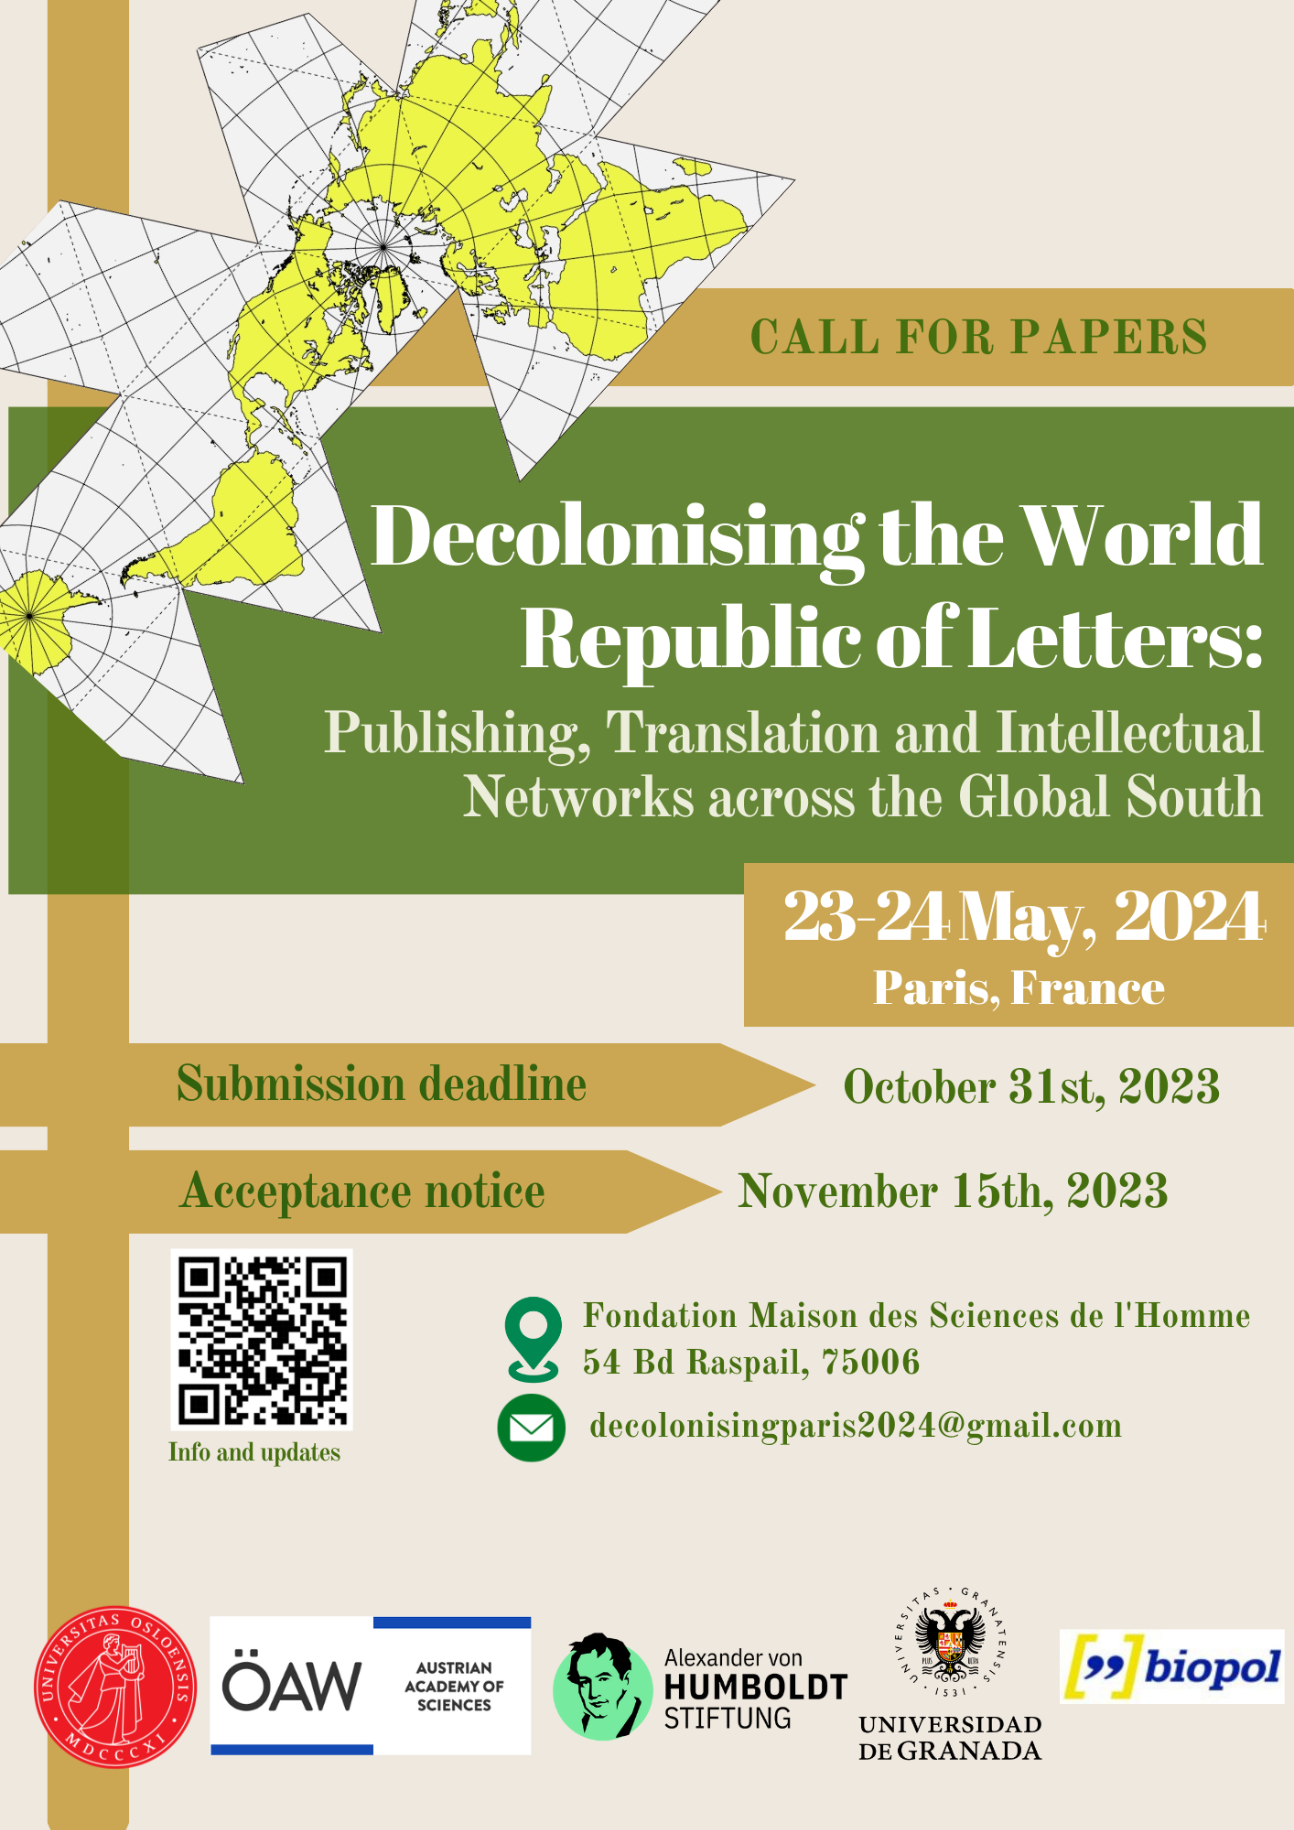 Decolonising the World Republic of Letters: Translation, Circulation, and Intellectual Networks across the Global South (Paris)